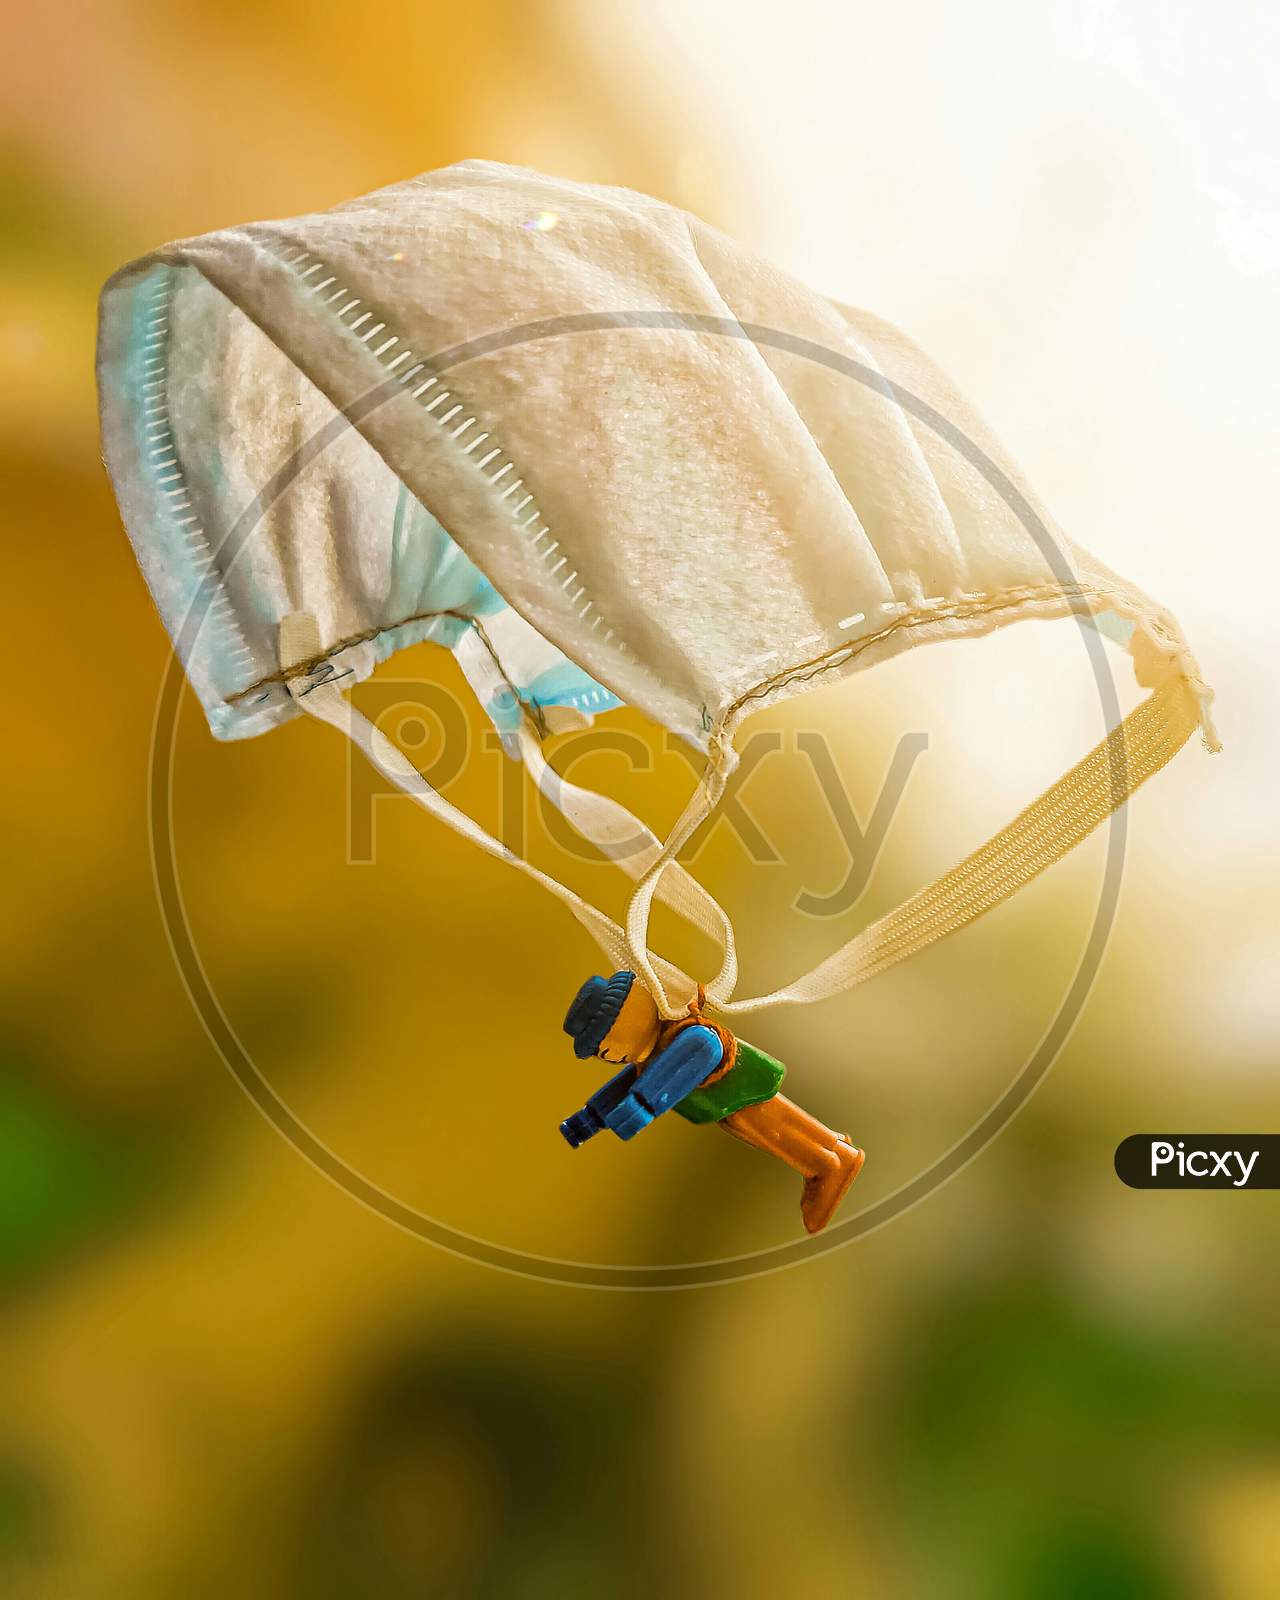 Covid19 Mask, parachute, toy